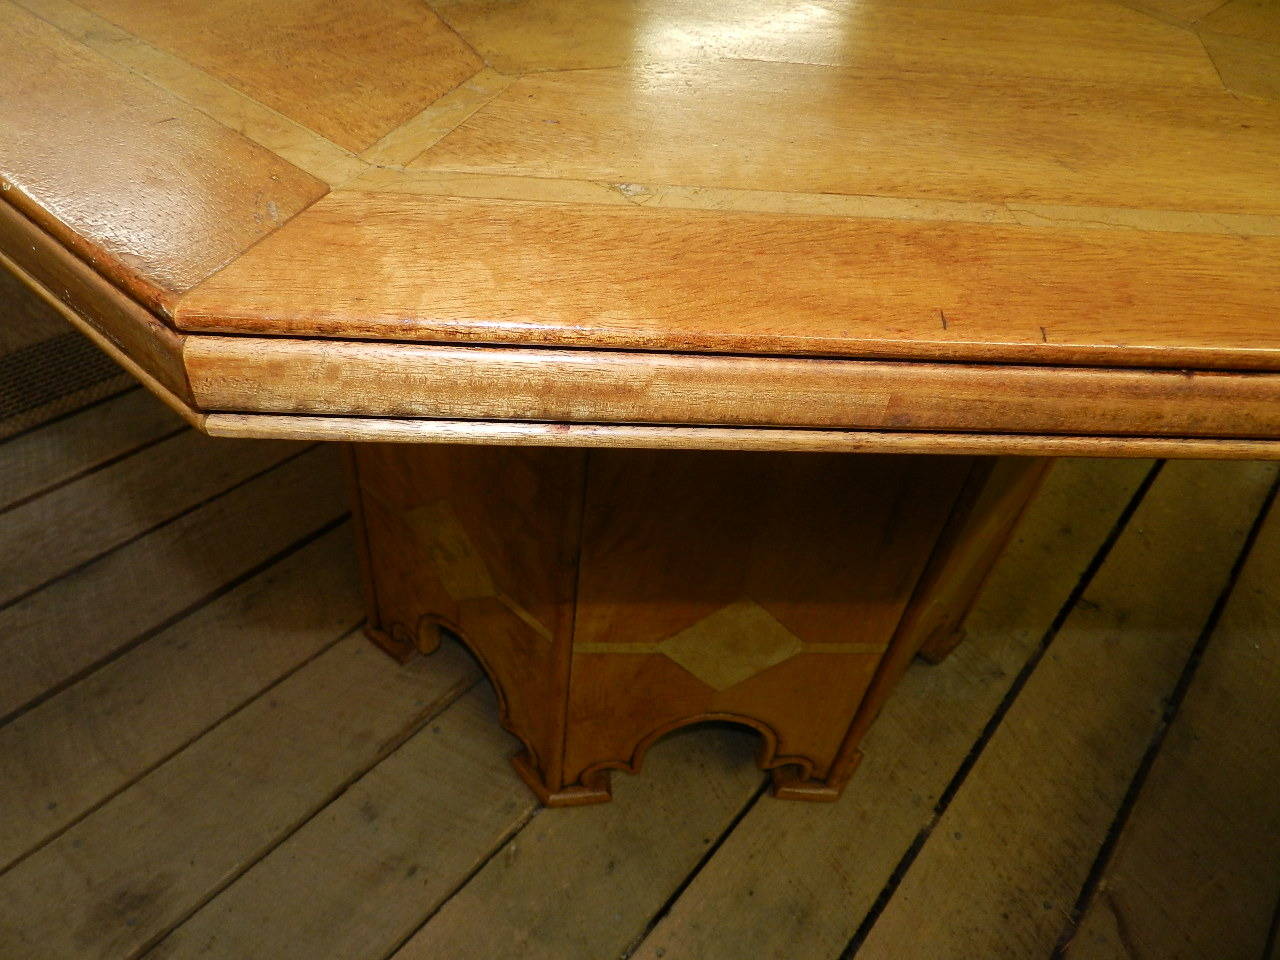 Octagonal Mahogany Table with Inlaid Marble In Excellent Condition In Millwood, VA